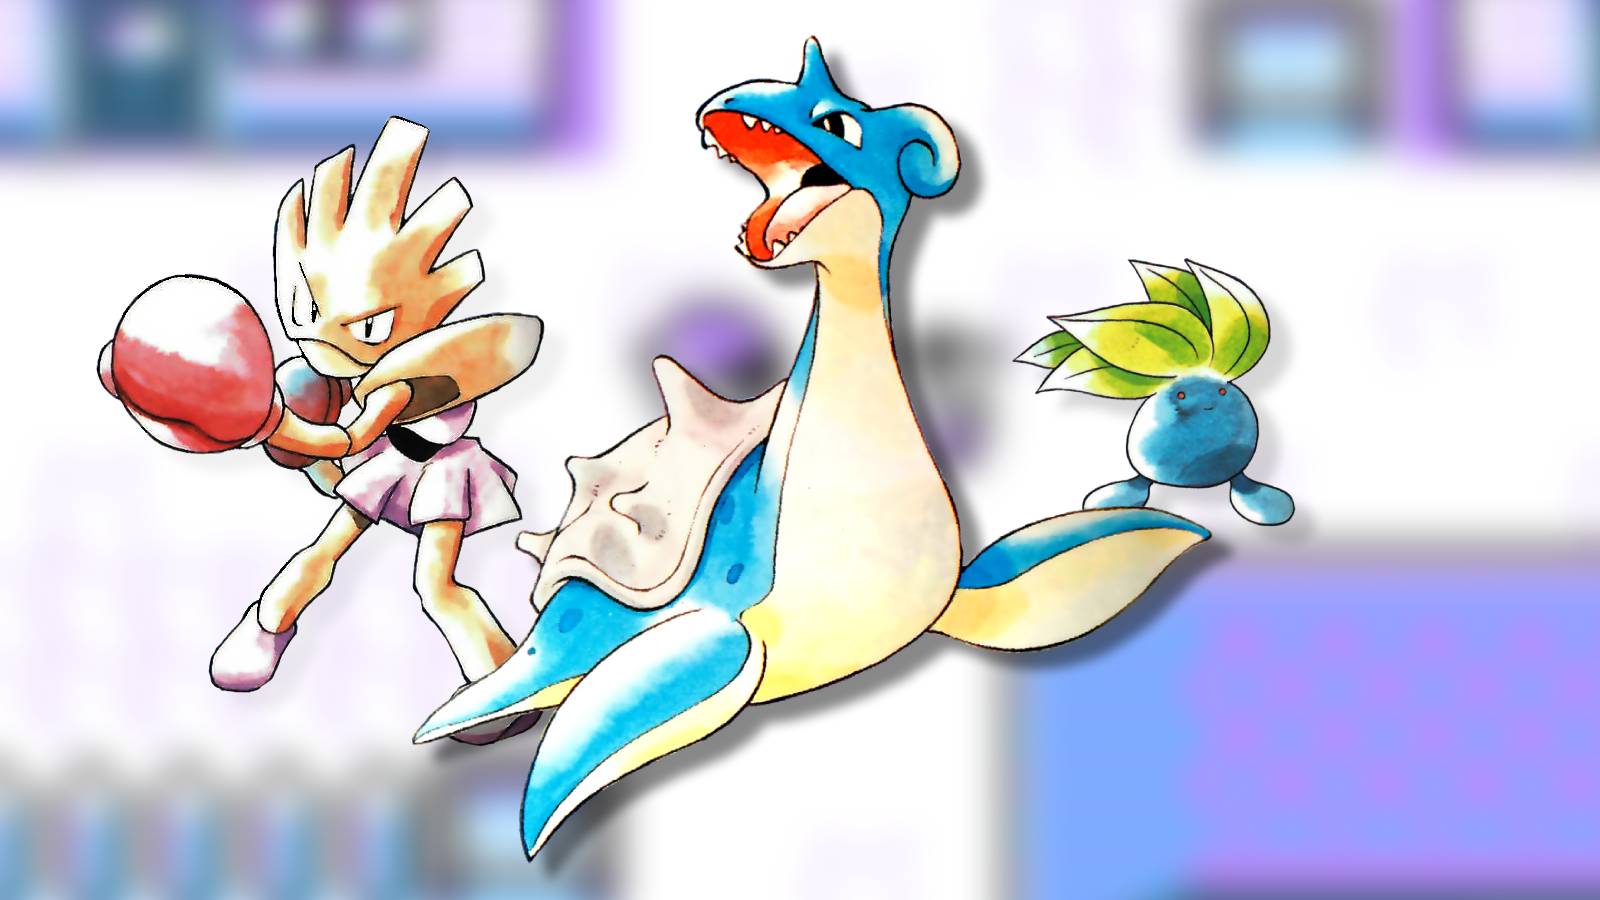 The Pokemon Lapras, Hitmonchan, and Oddish, and shown against a blurred background